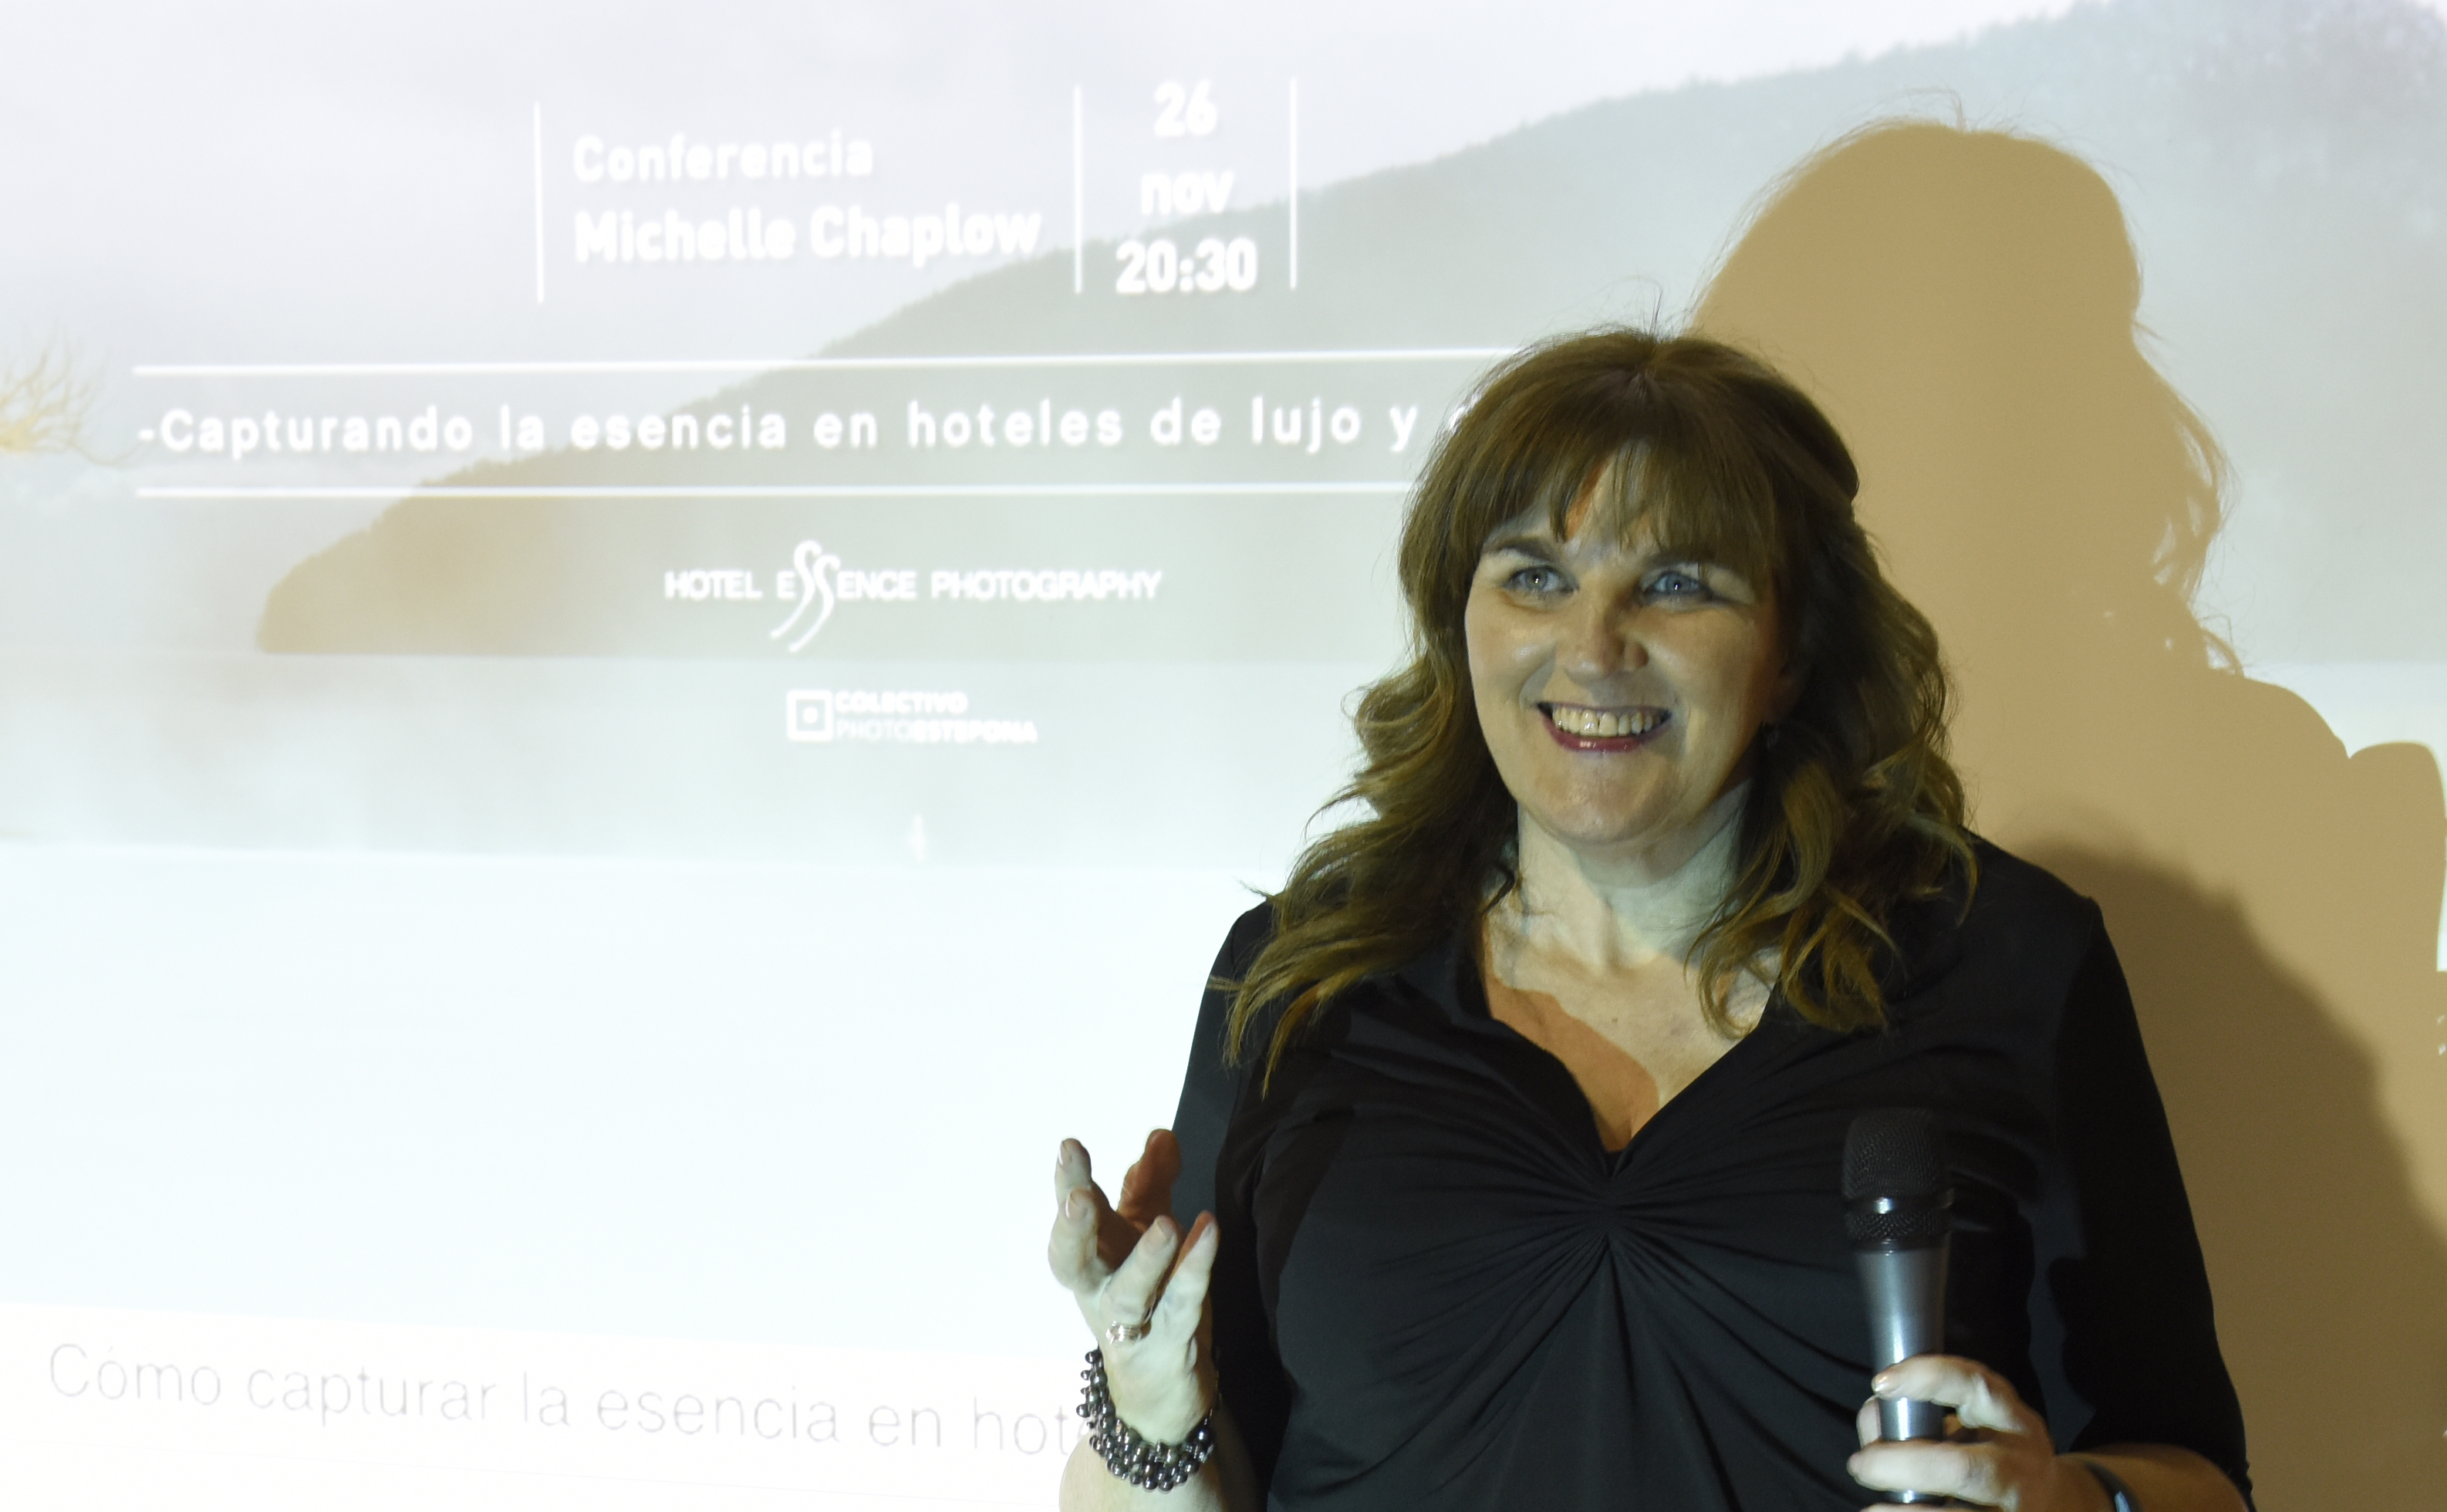 Michelle Speaking at PhotoEstepona